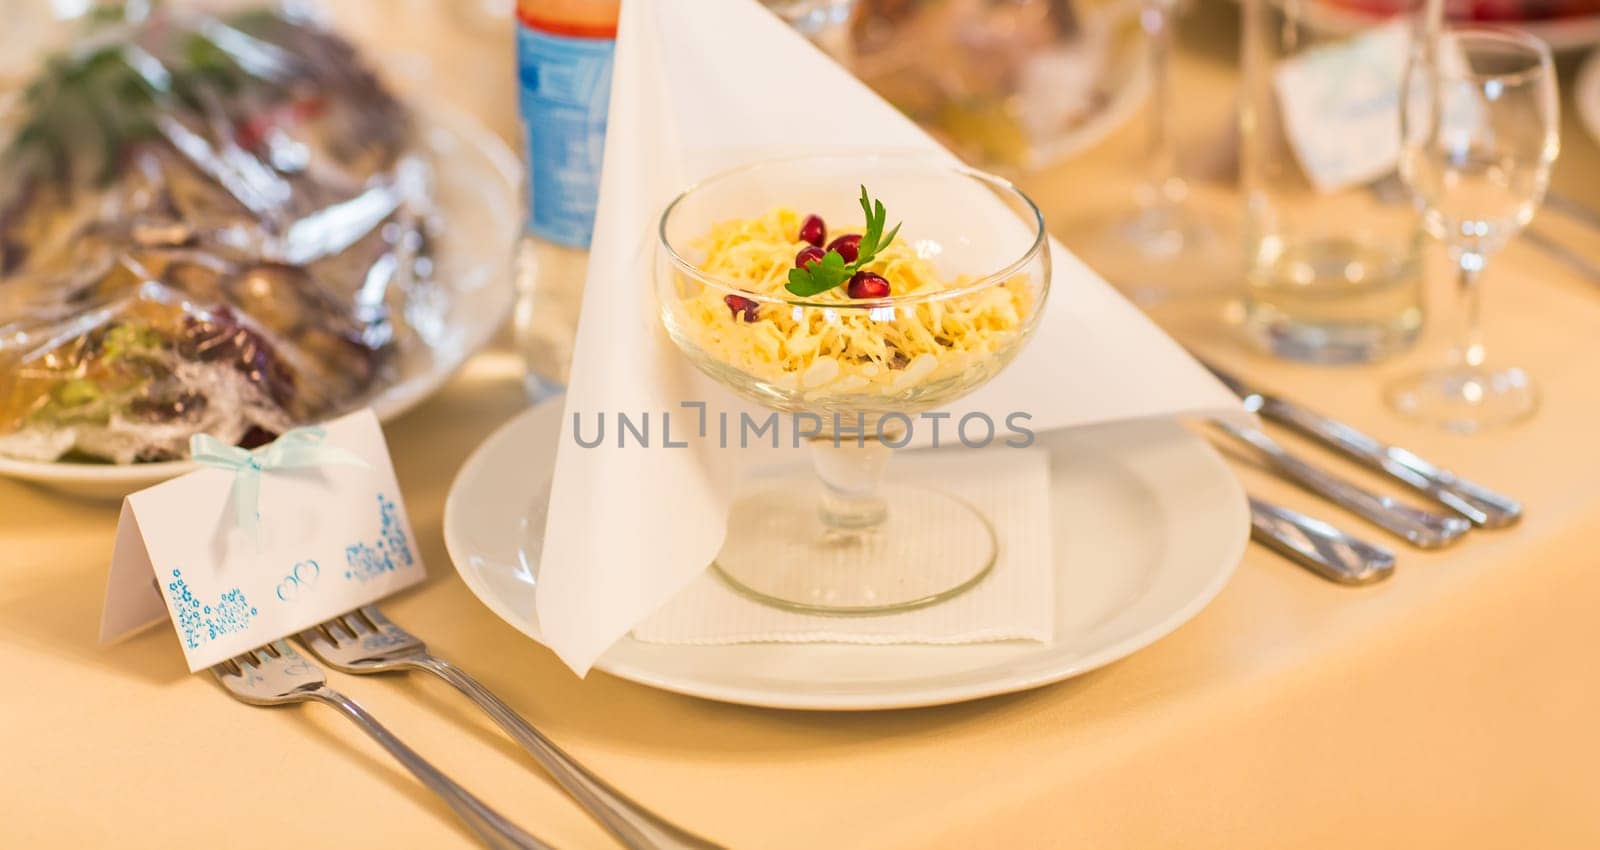 Served for a banquet table. Wine glasses with napkins, plate and salads. by Satura86